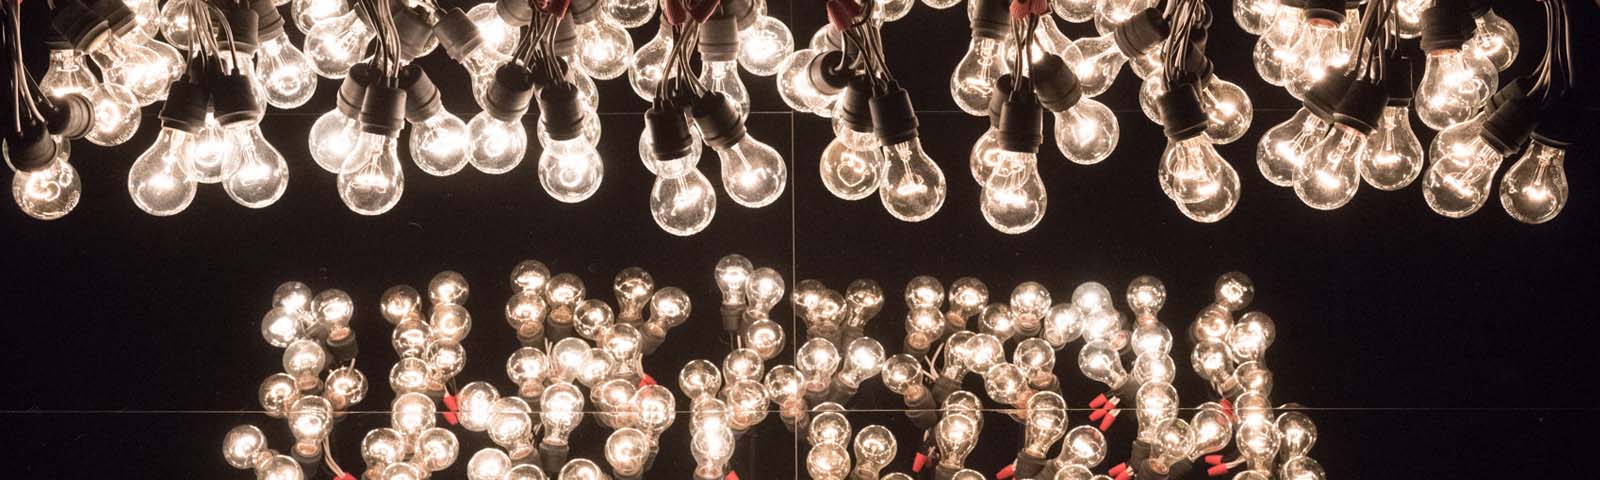 Close-up of a set of light bulbs on a black background